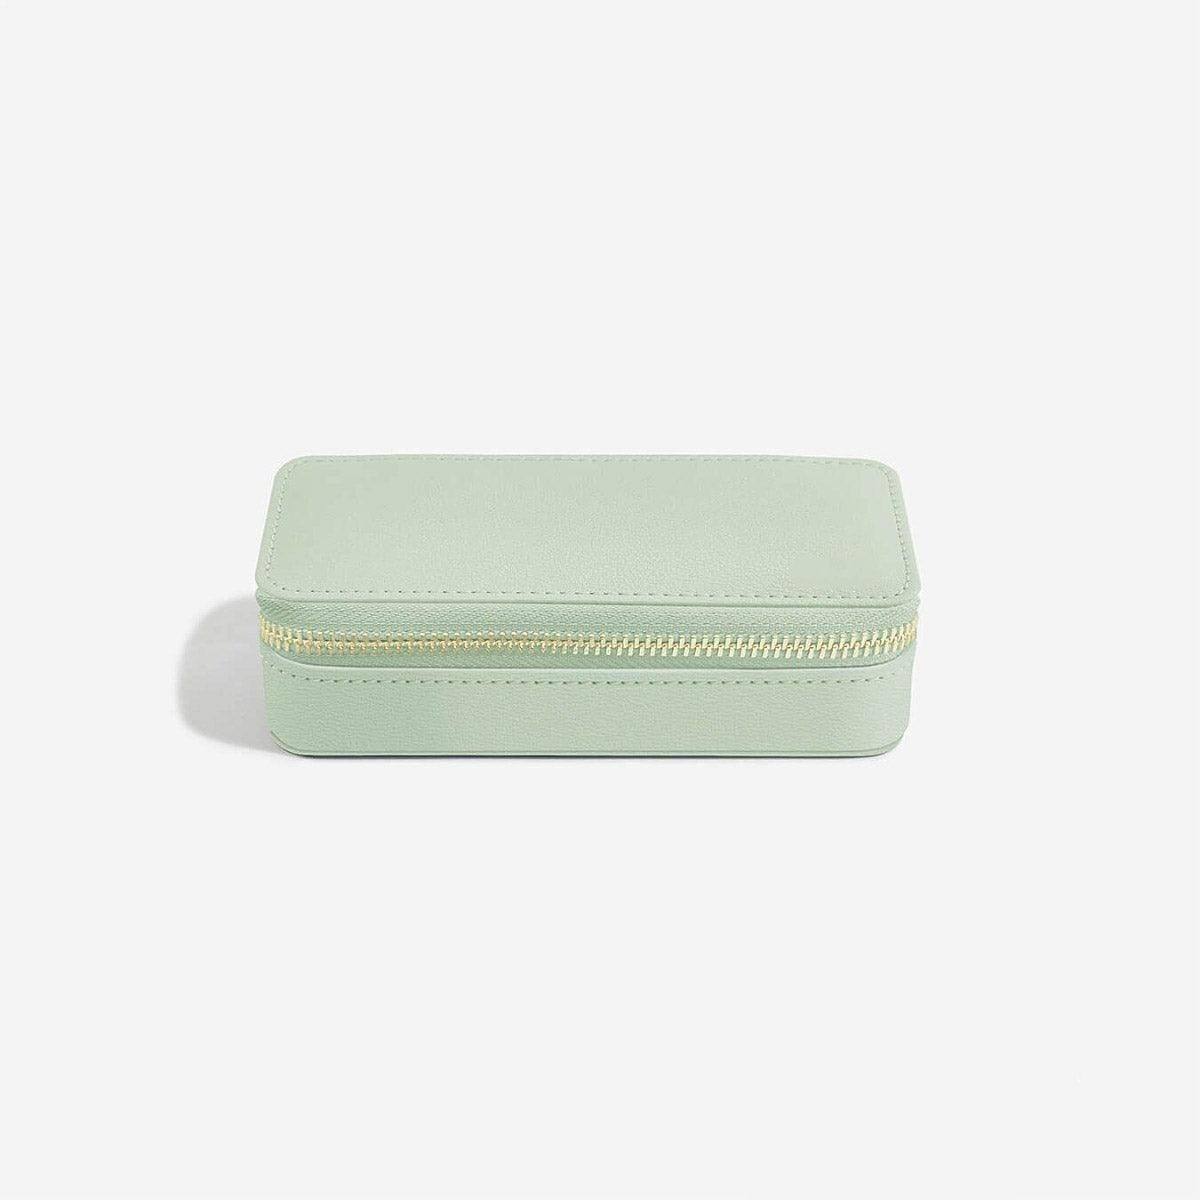 Stackers London Travel Jewellery Pouch Medium - Sage Green